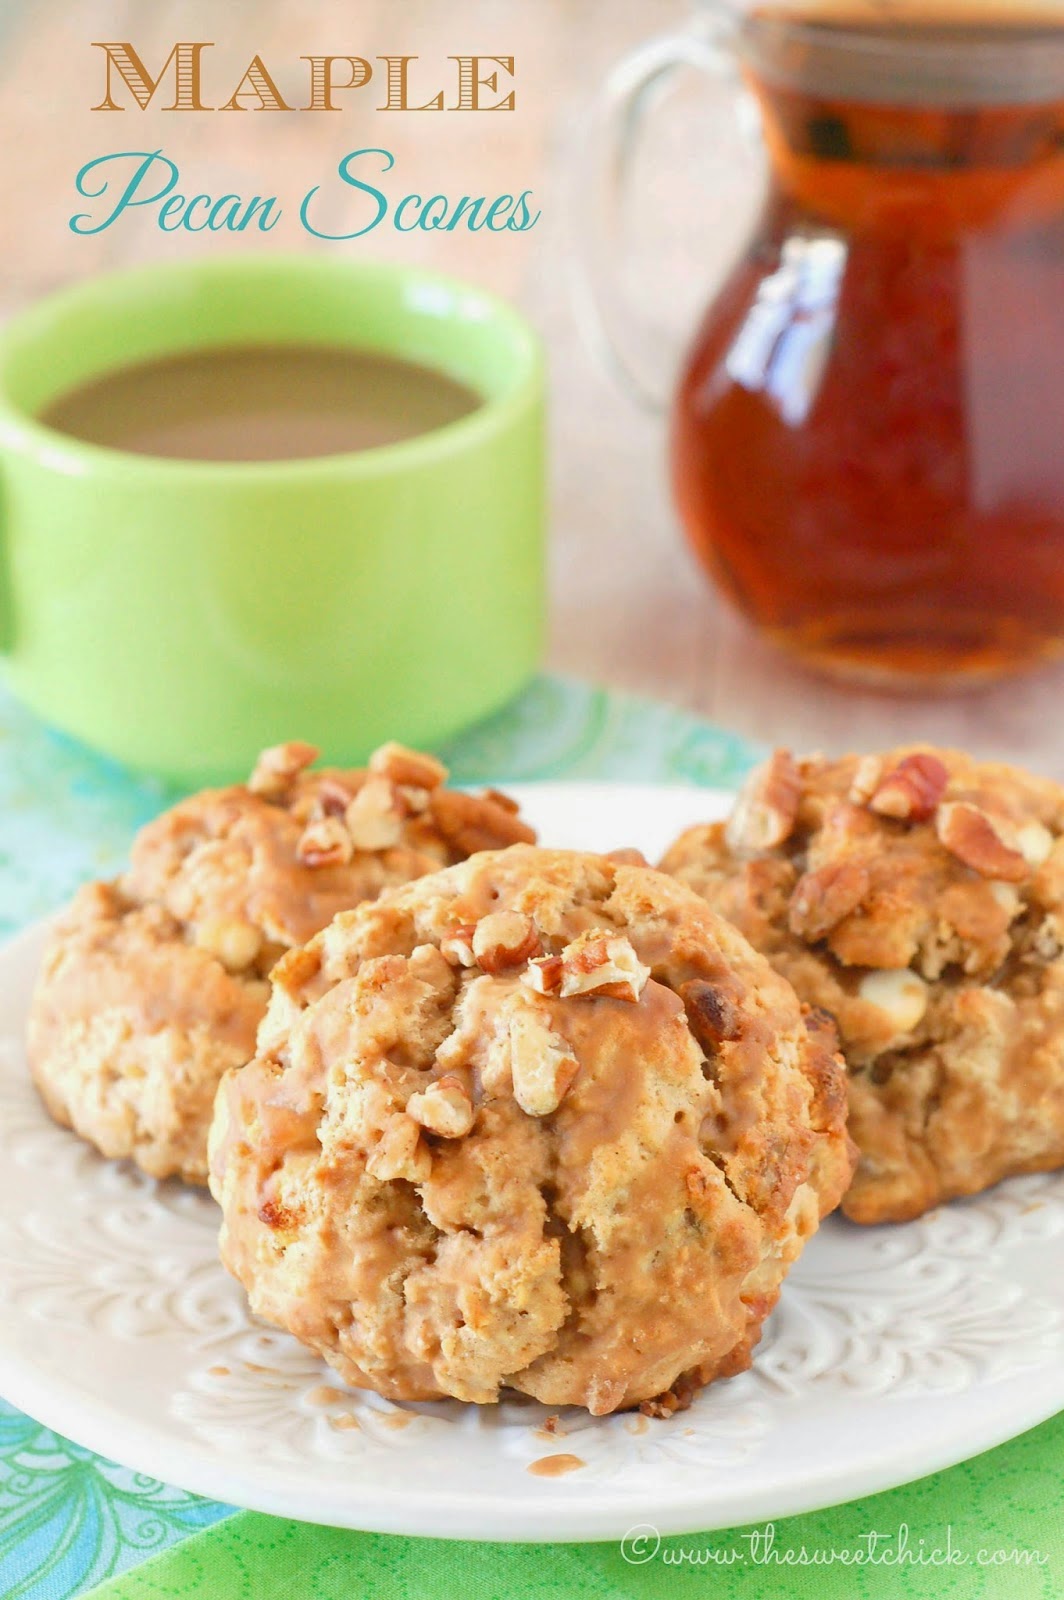 Maple Pecan Scones by The Sweet Chick